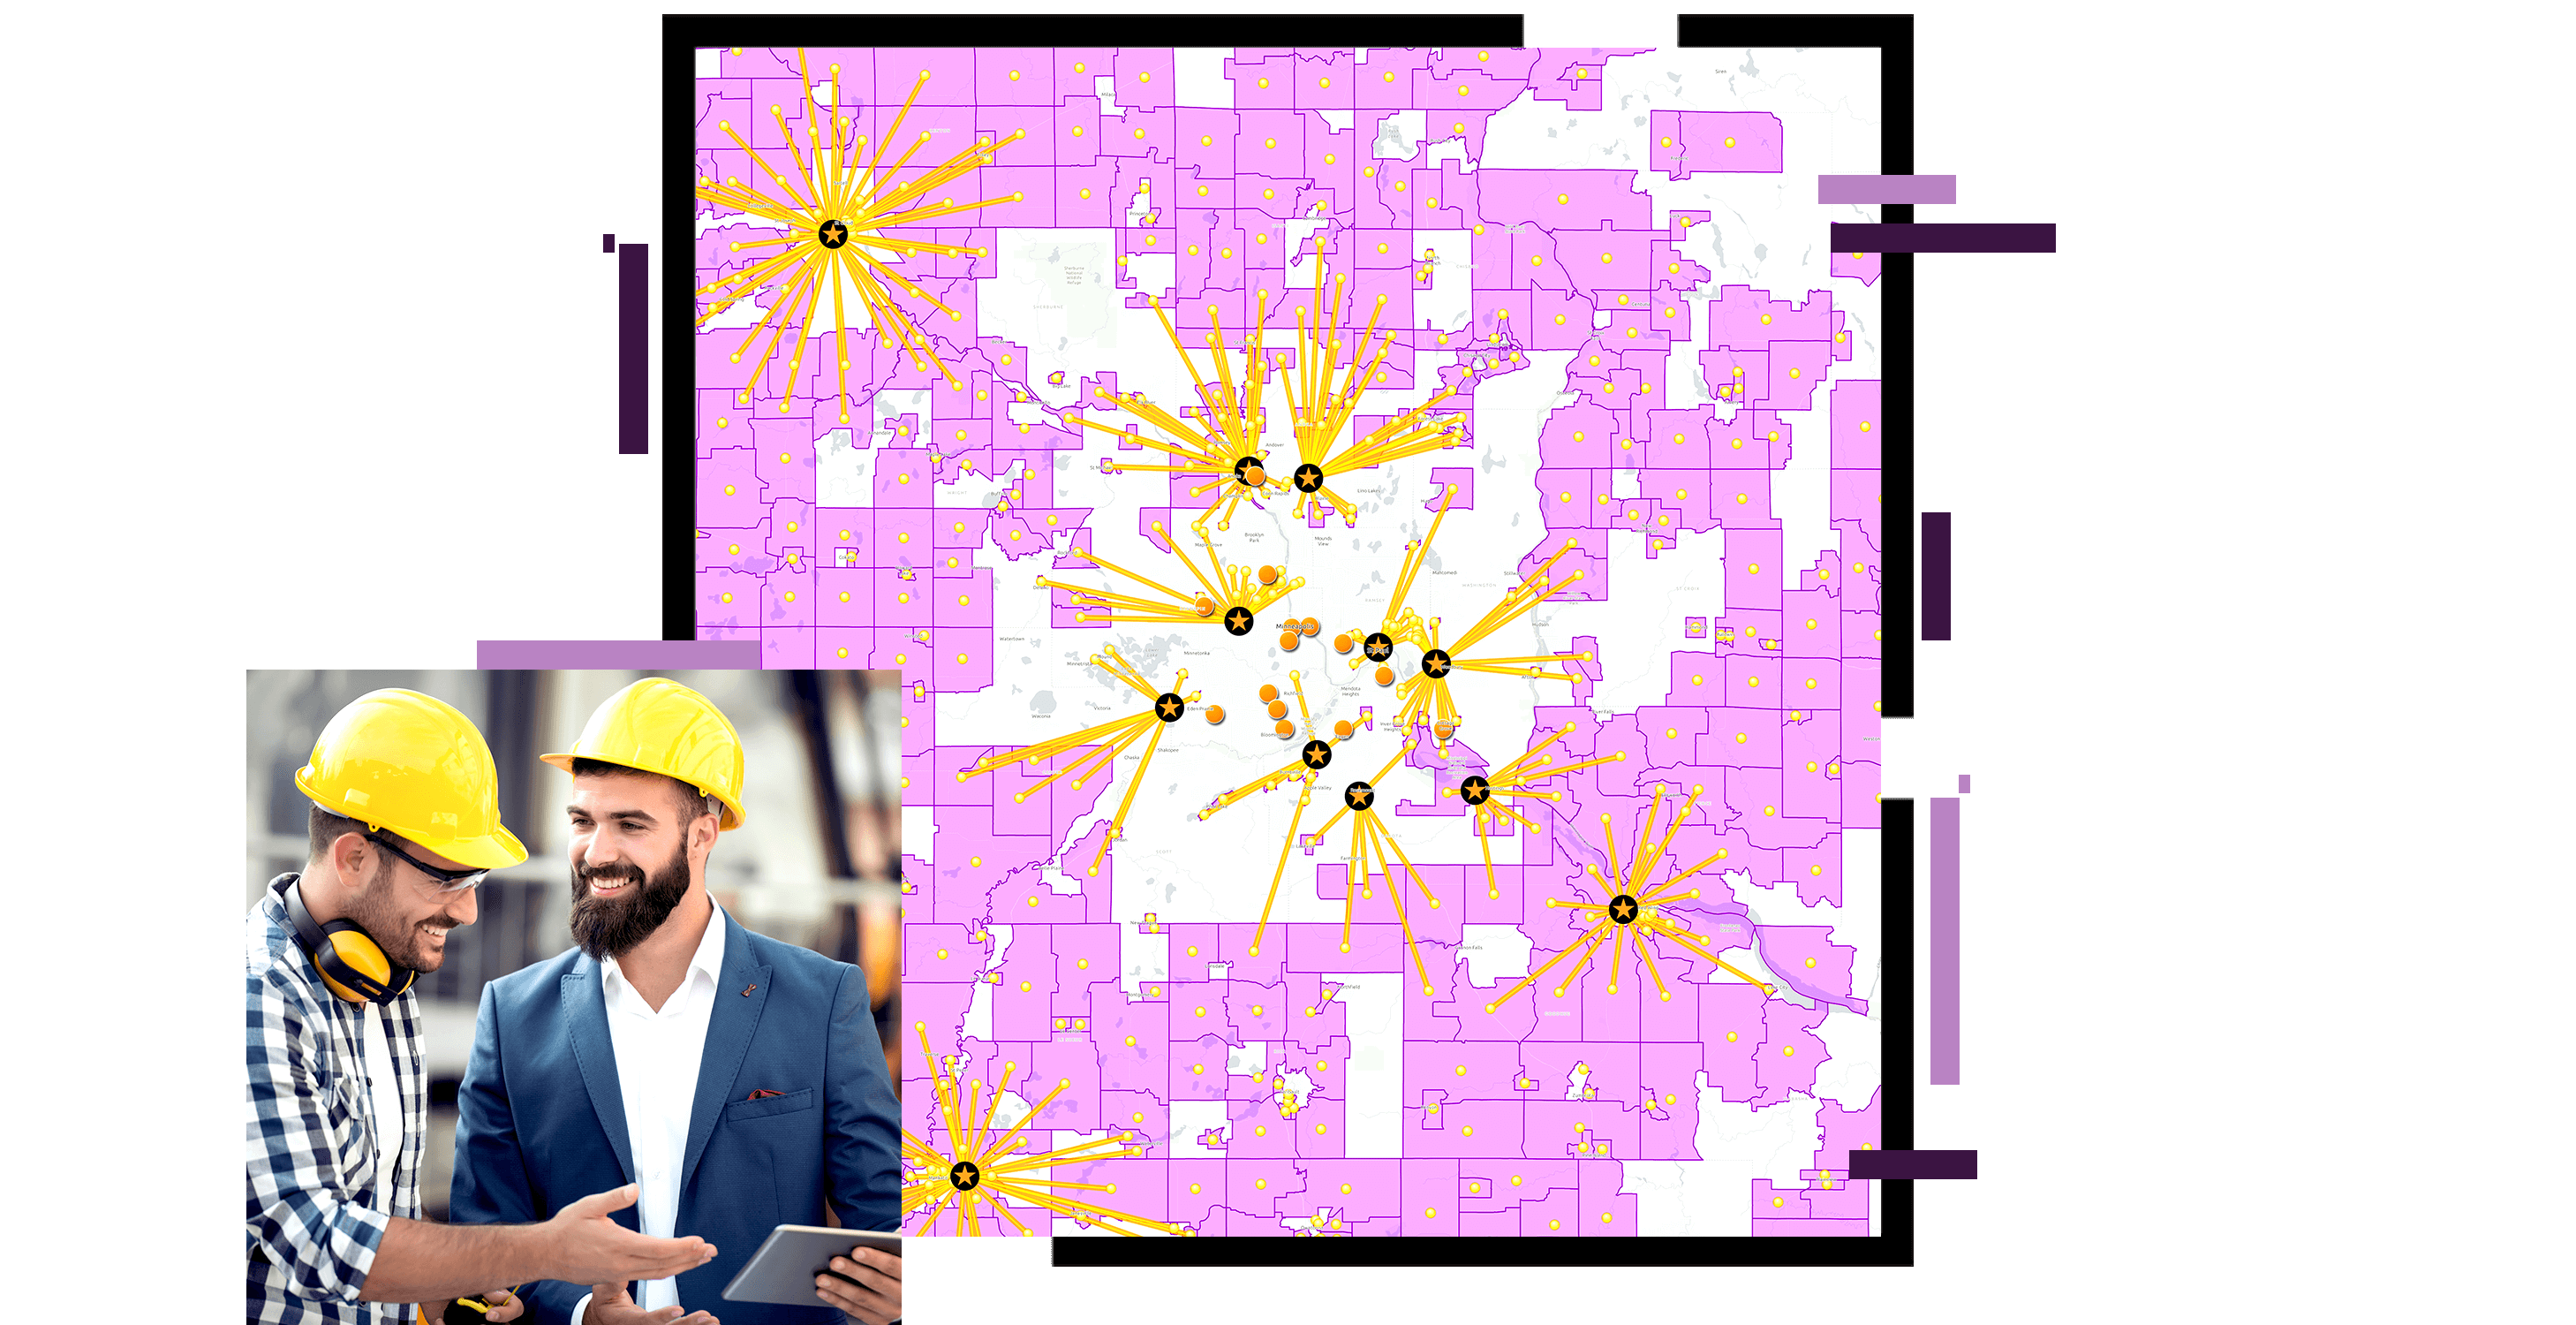 A site selection map in yellow and pink, overlaid with a photo of two people wearing hard hats discussing a tablet display